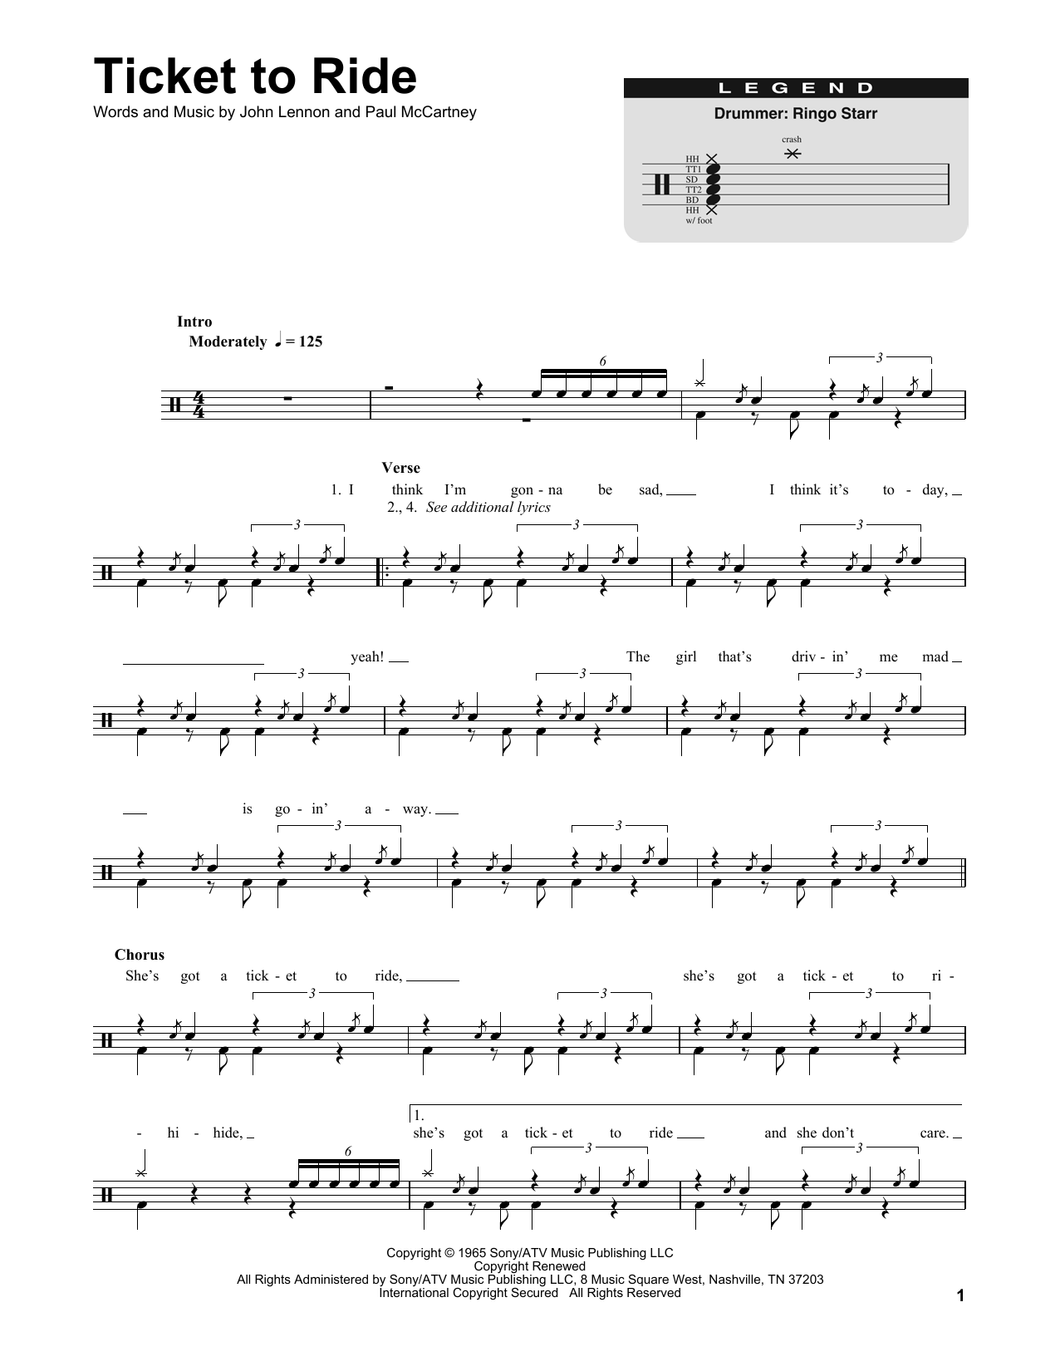 Ticket to Ride - The Beatles - Full Drum Transcription / Drum Sheet Music - SheetMusicDirect DT